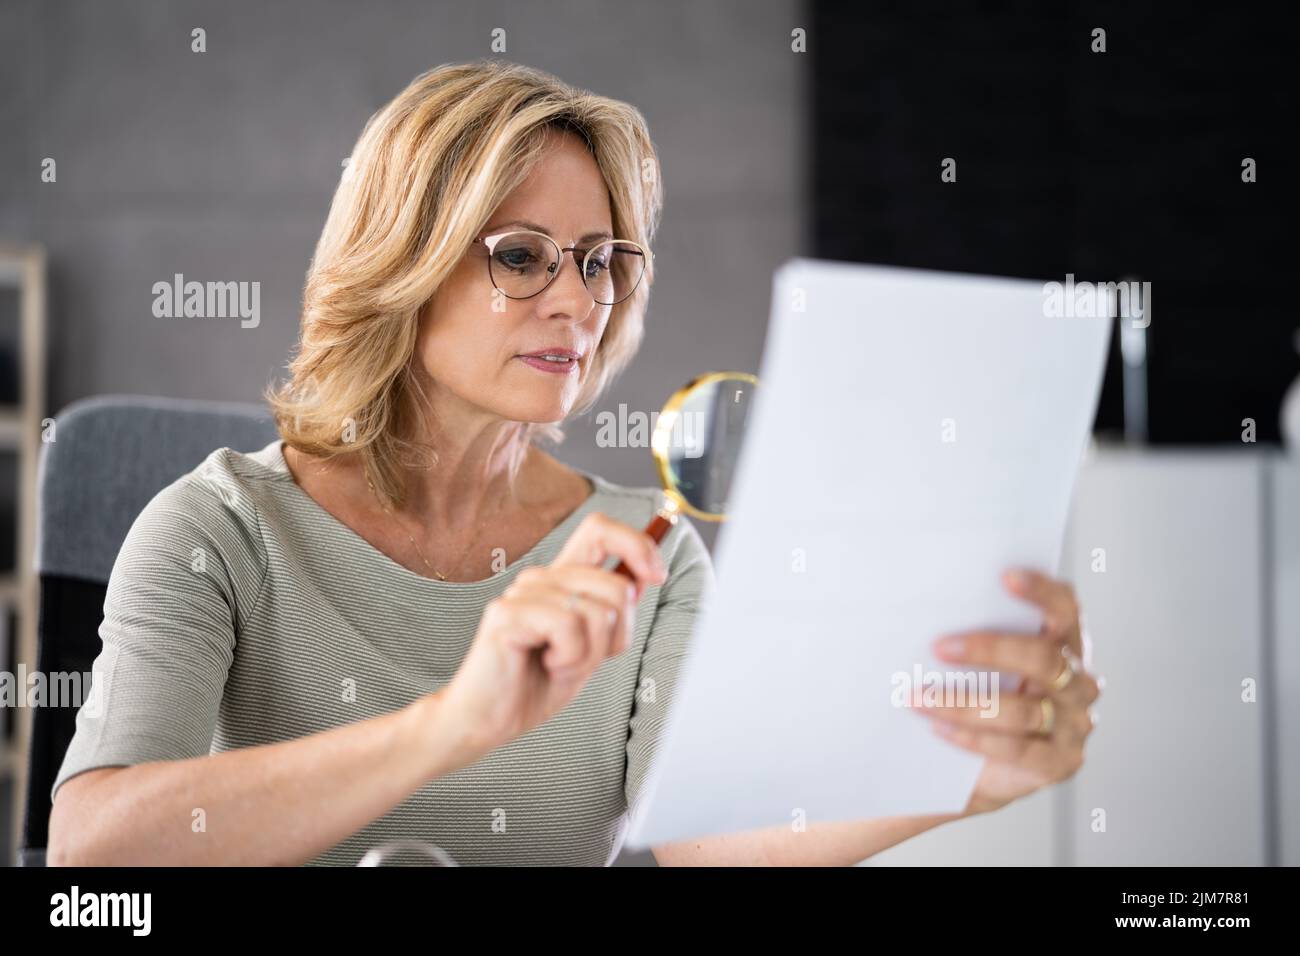 Investigate Fraud And Examine Document Using Magnifying Glass Stock Photo